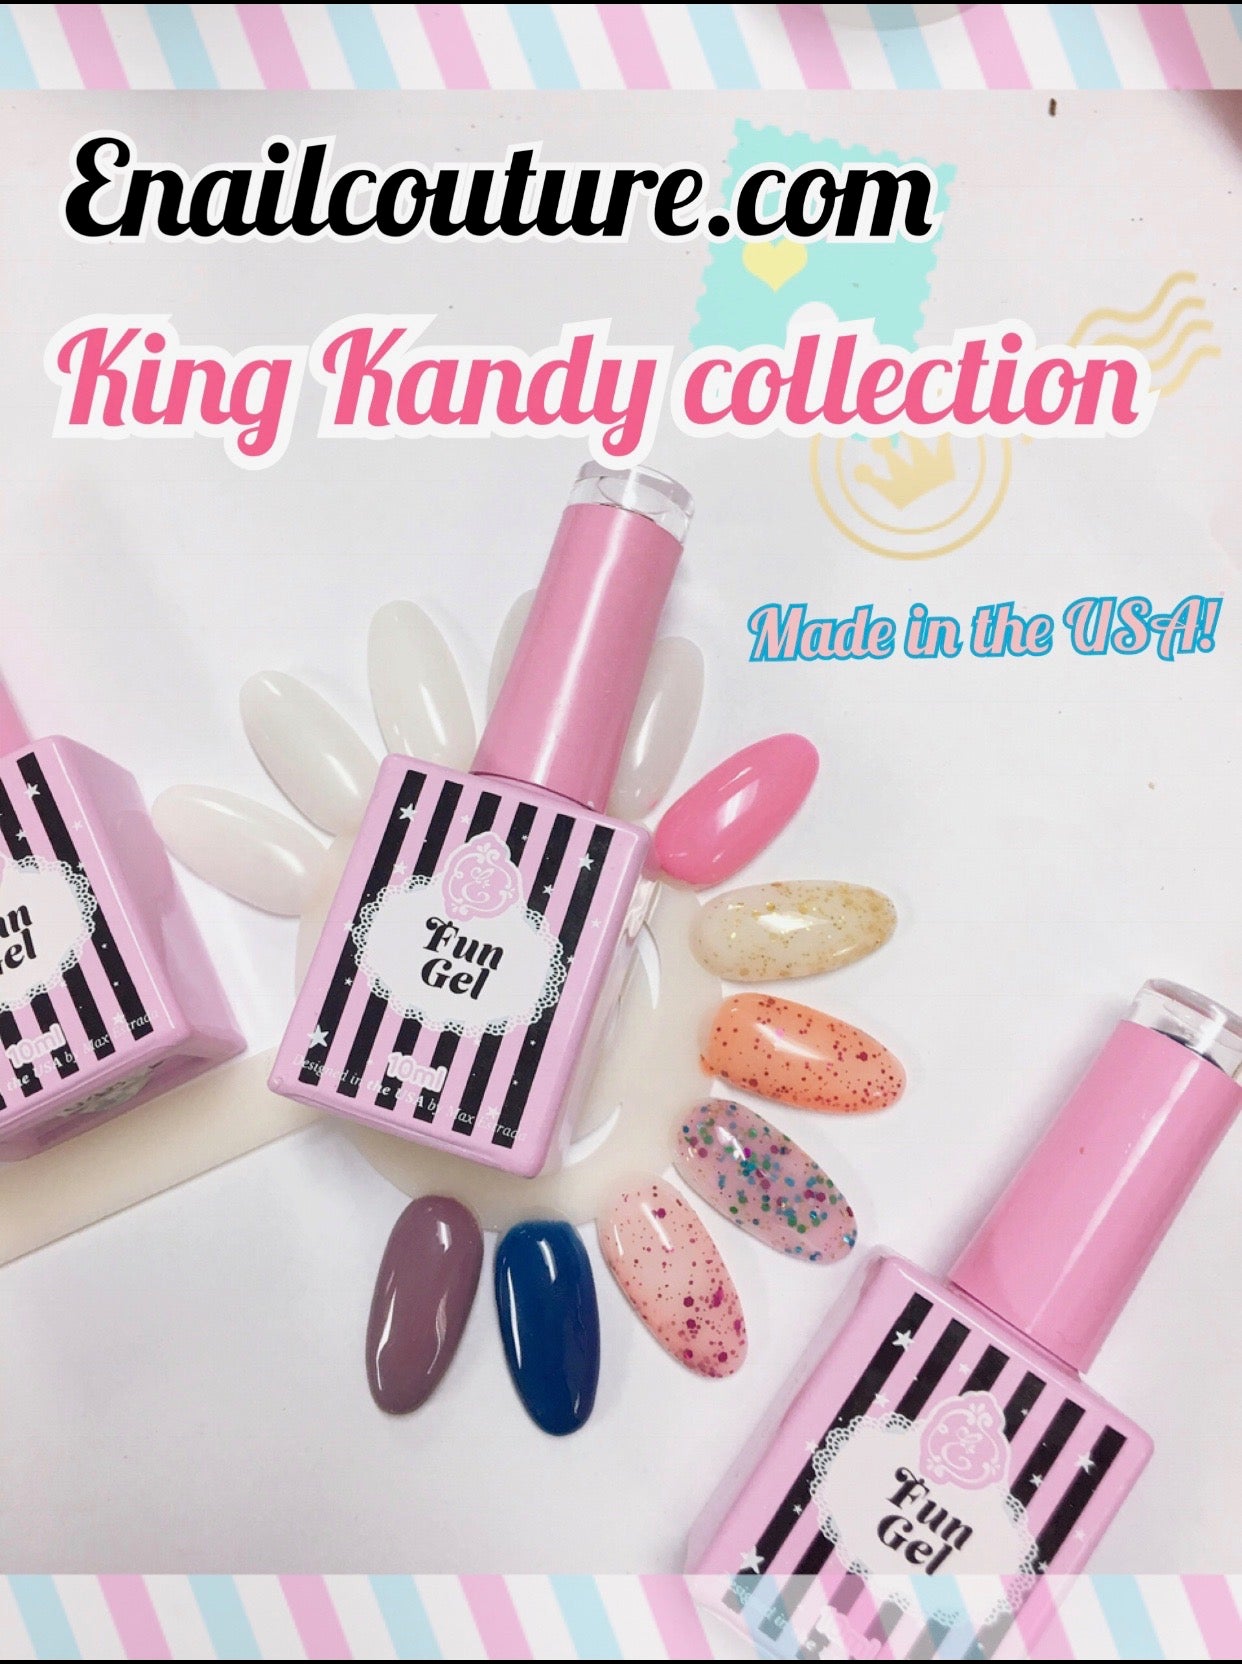 king kandy! fun gel candy tone collection